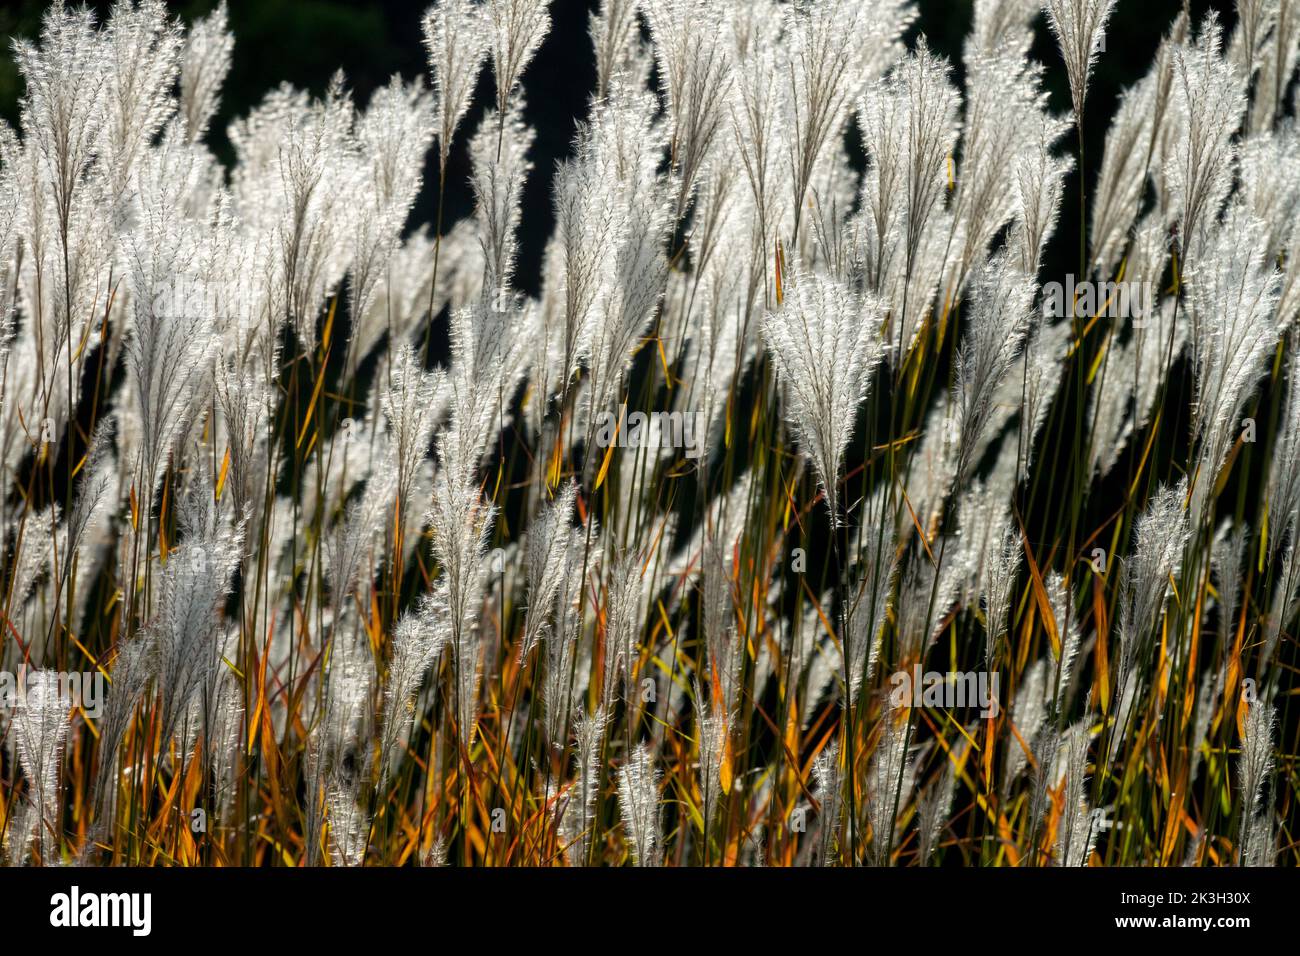 Autumn Red Miscanthus, Miscanthus purpurascens Feathery seed-heads, Ornamental, Grass Panicles Flame Grass, Miscanthus sinensis, Perennial in sunshine Stock Photo